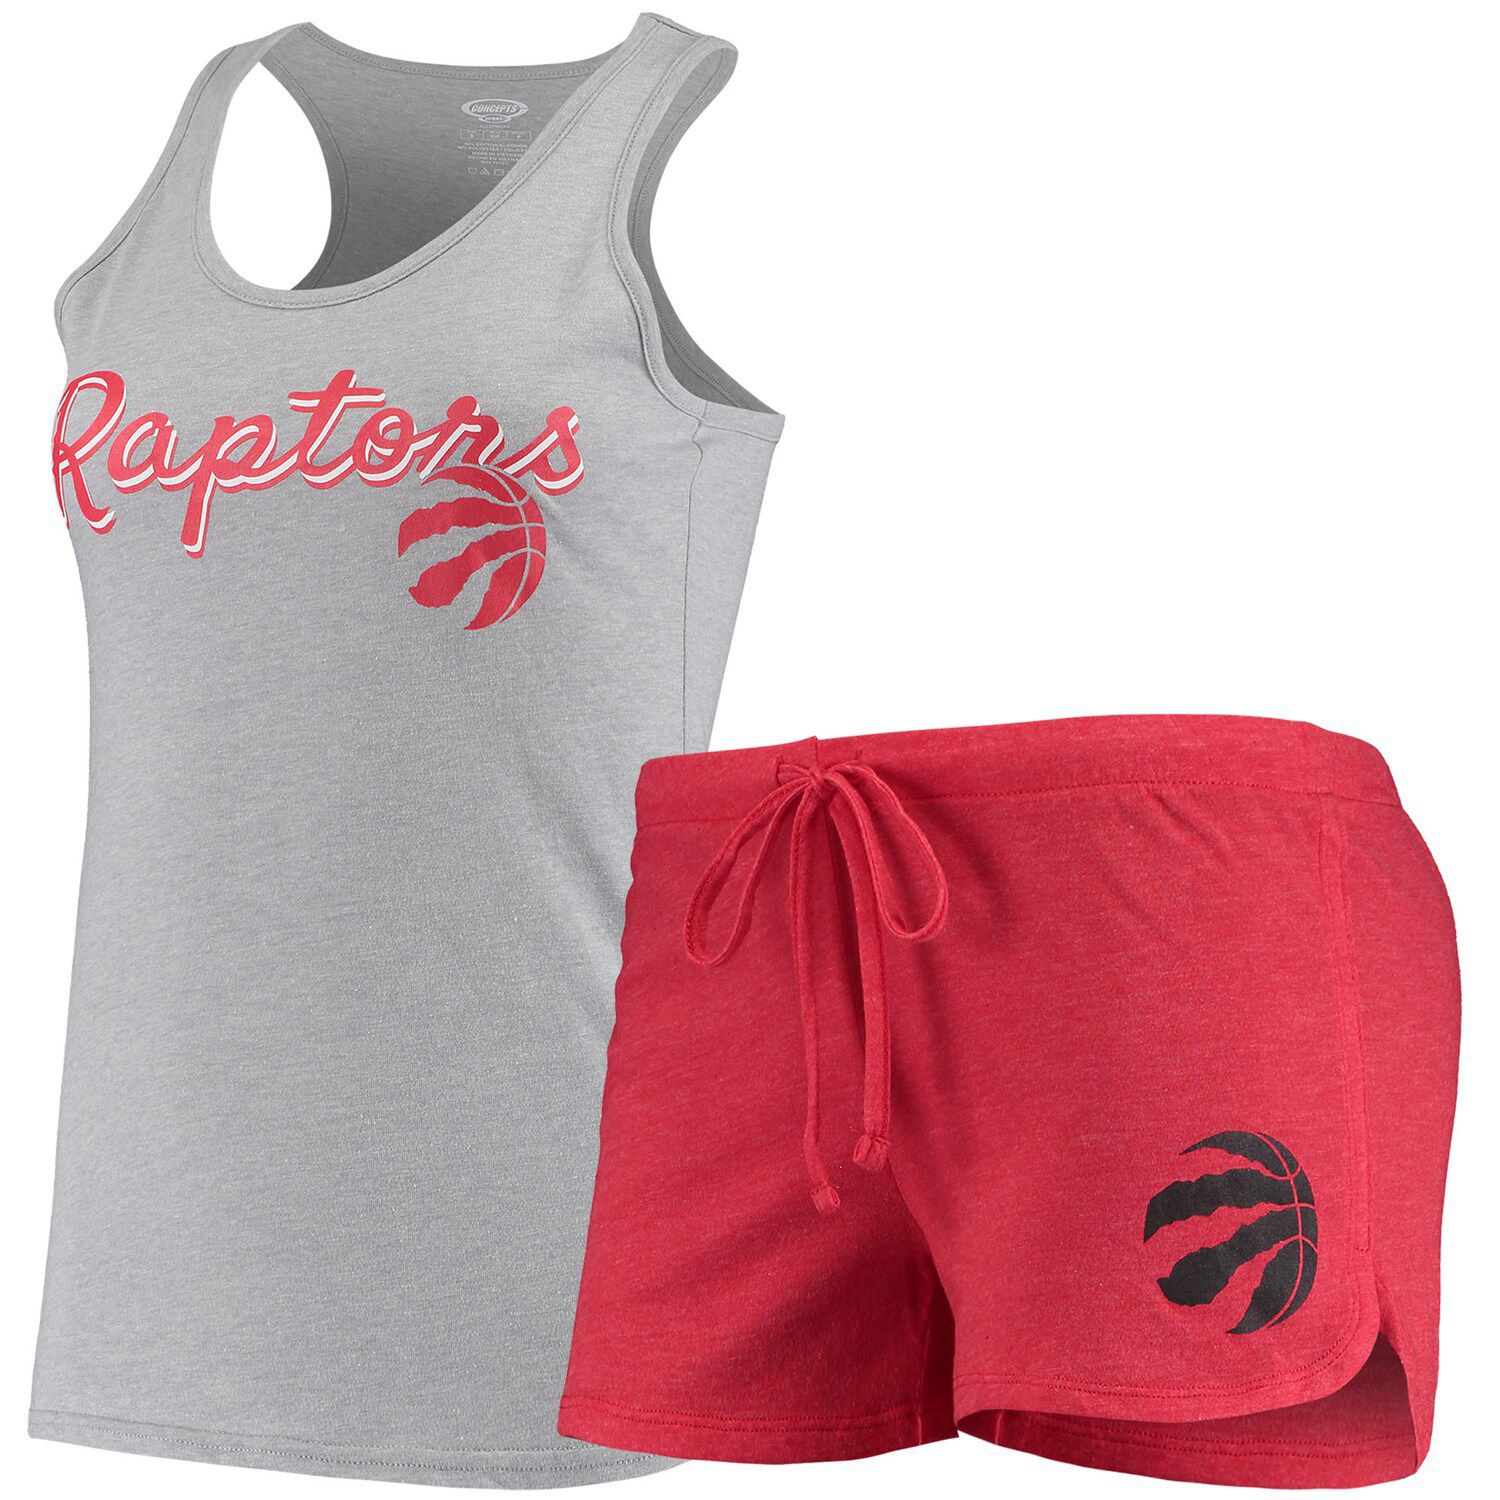 Image for Unbranded Women's Concepts Sport Heathered Gray/Heathered Red Toronto Raptors Anchor Tank Top & Shorts Sleep Set at Kohl's.